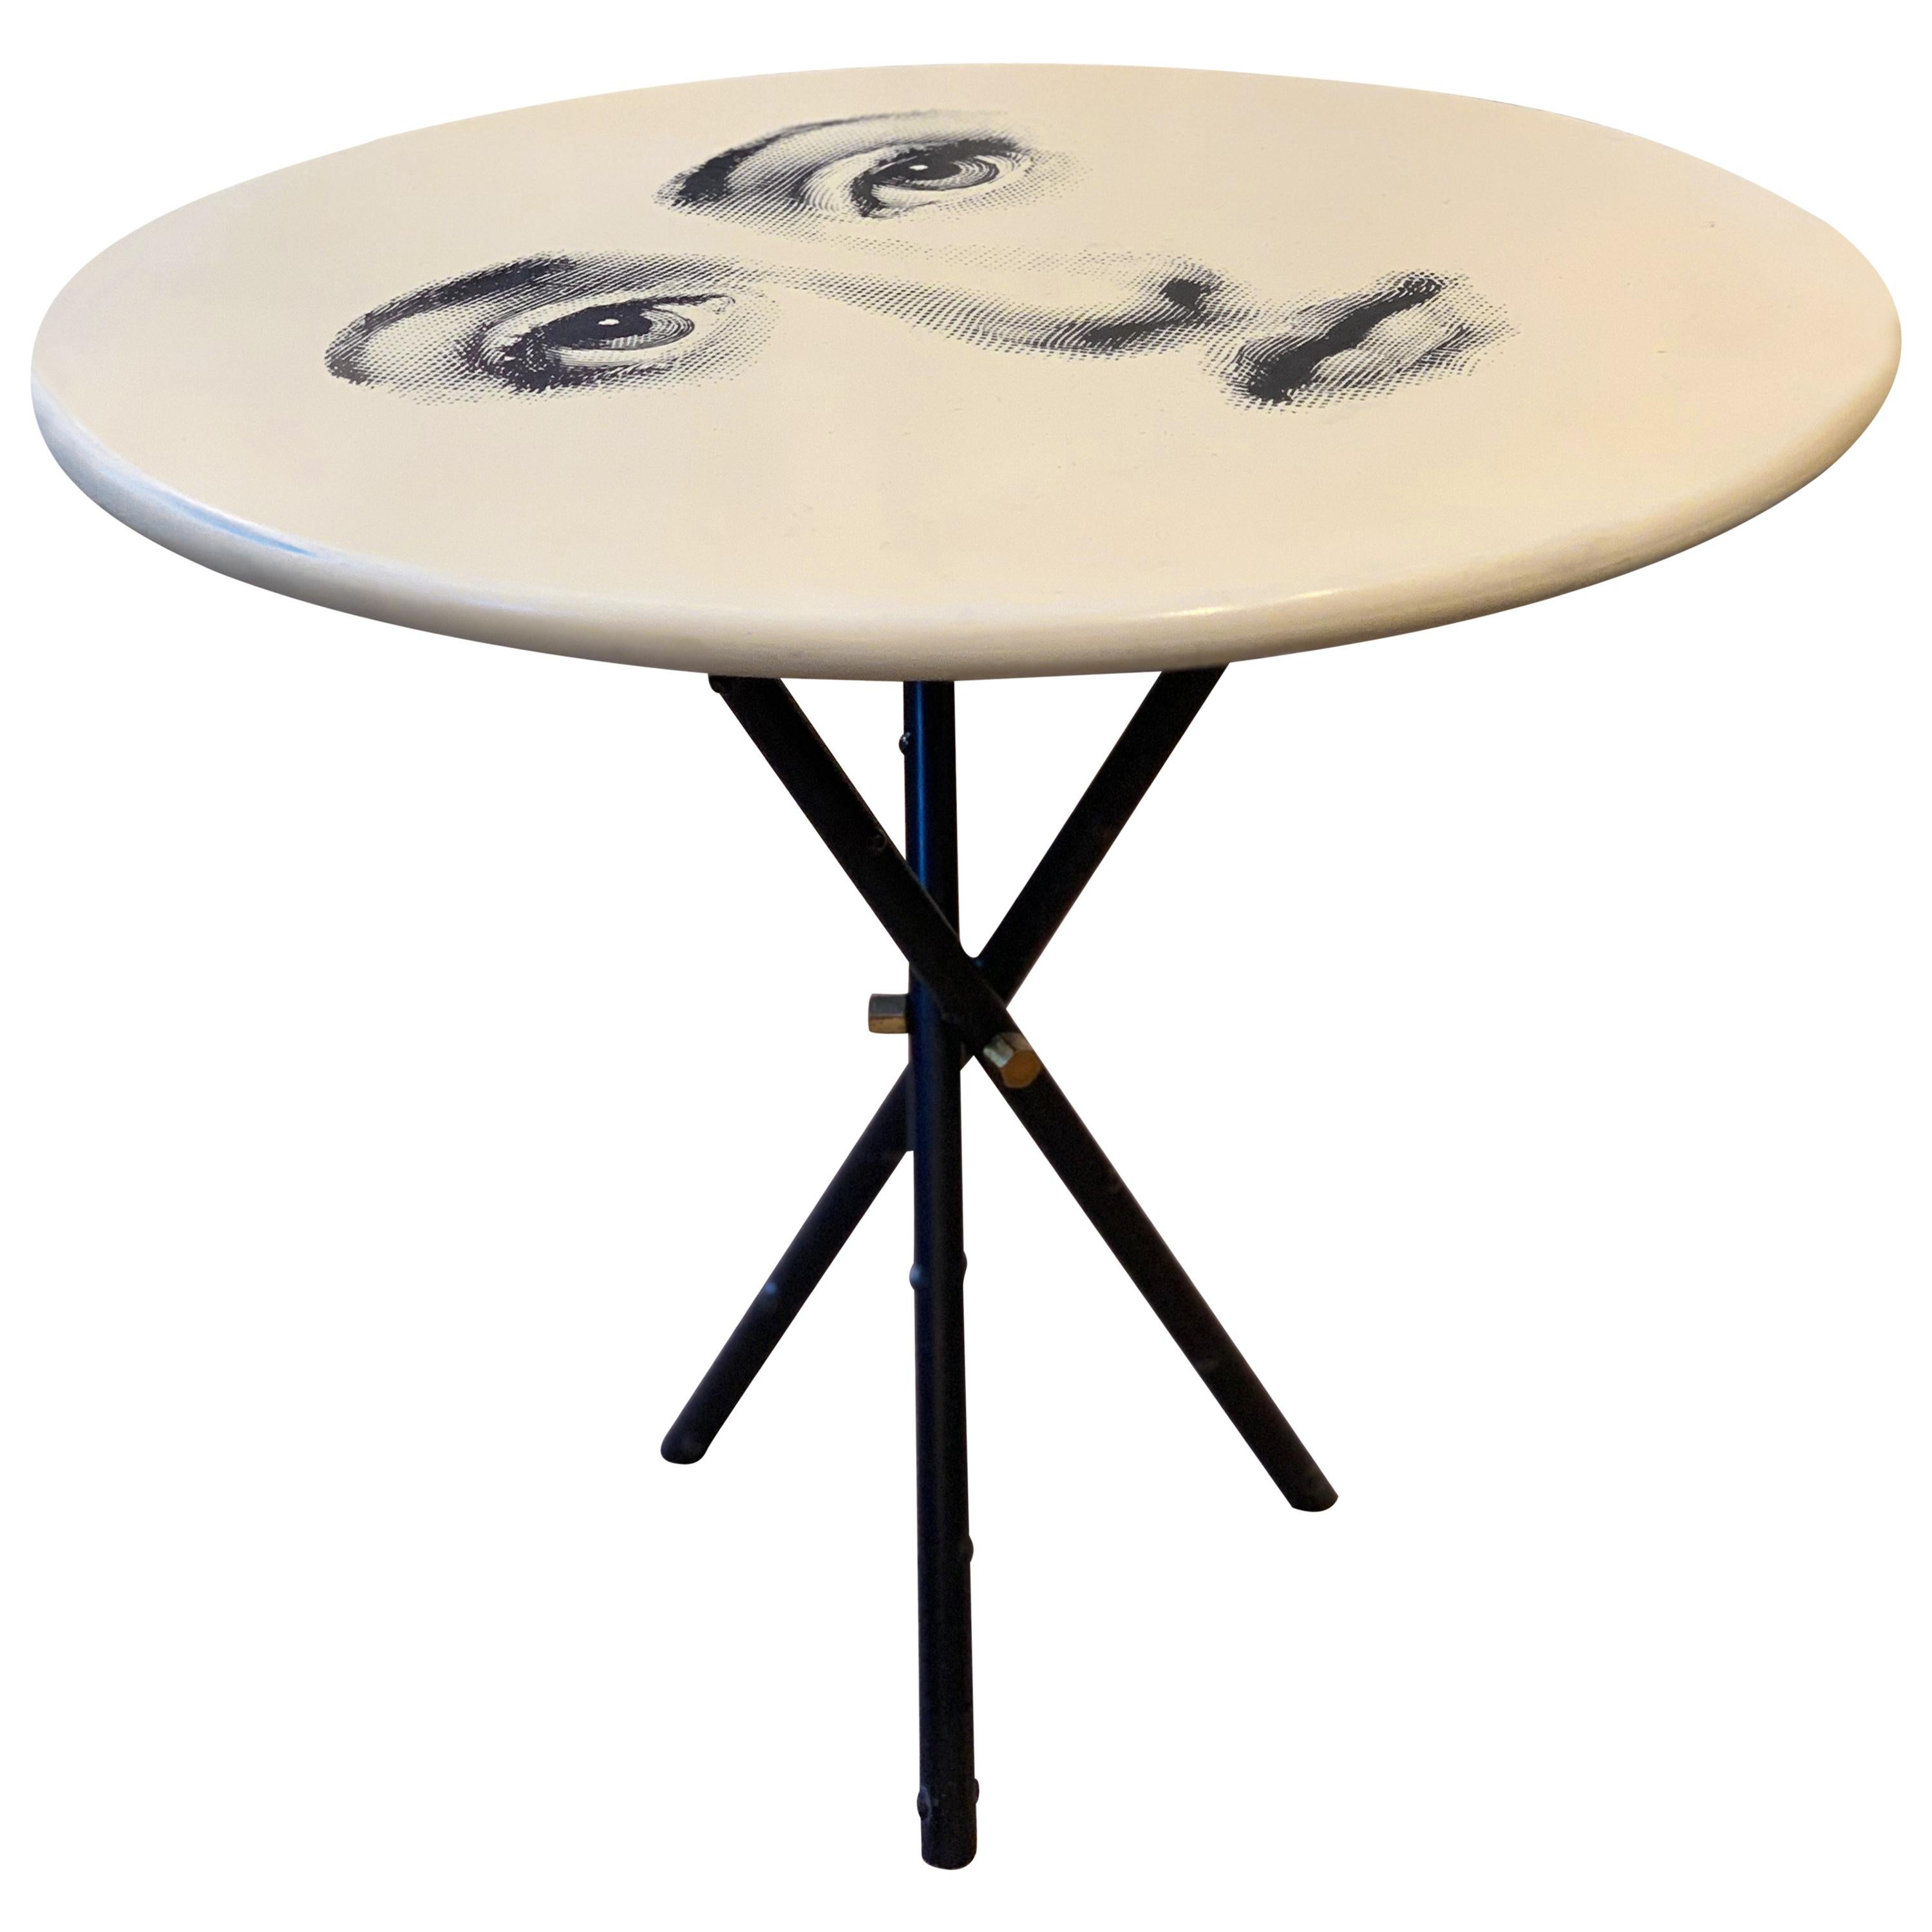 Occasional Table by Fornasetti Printed with Lina Cavalieri's Portrait